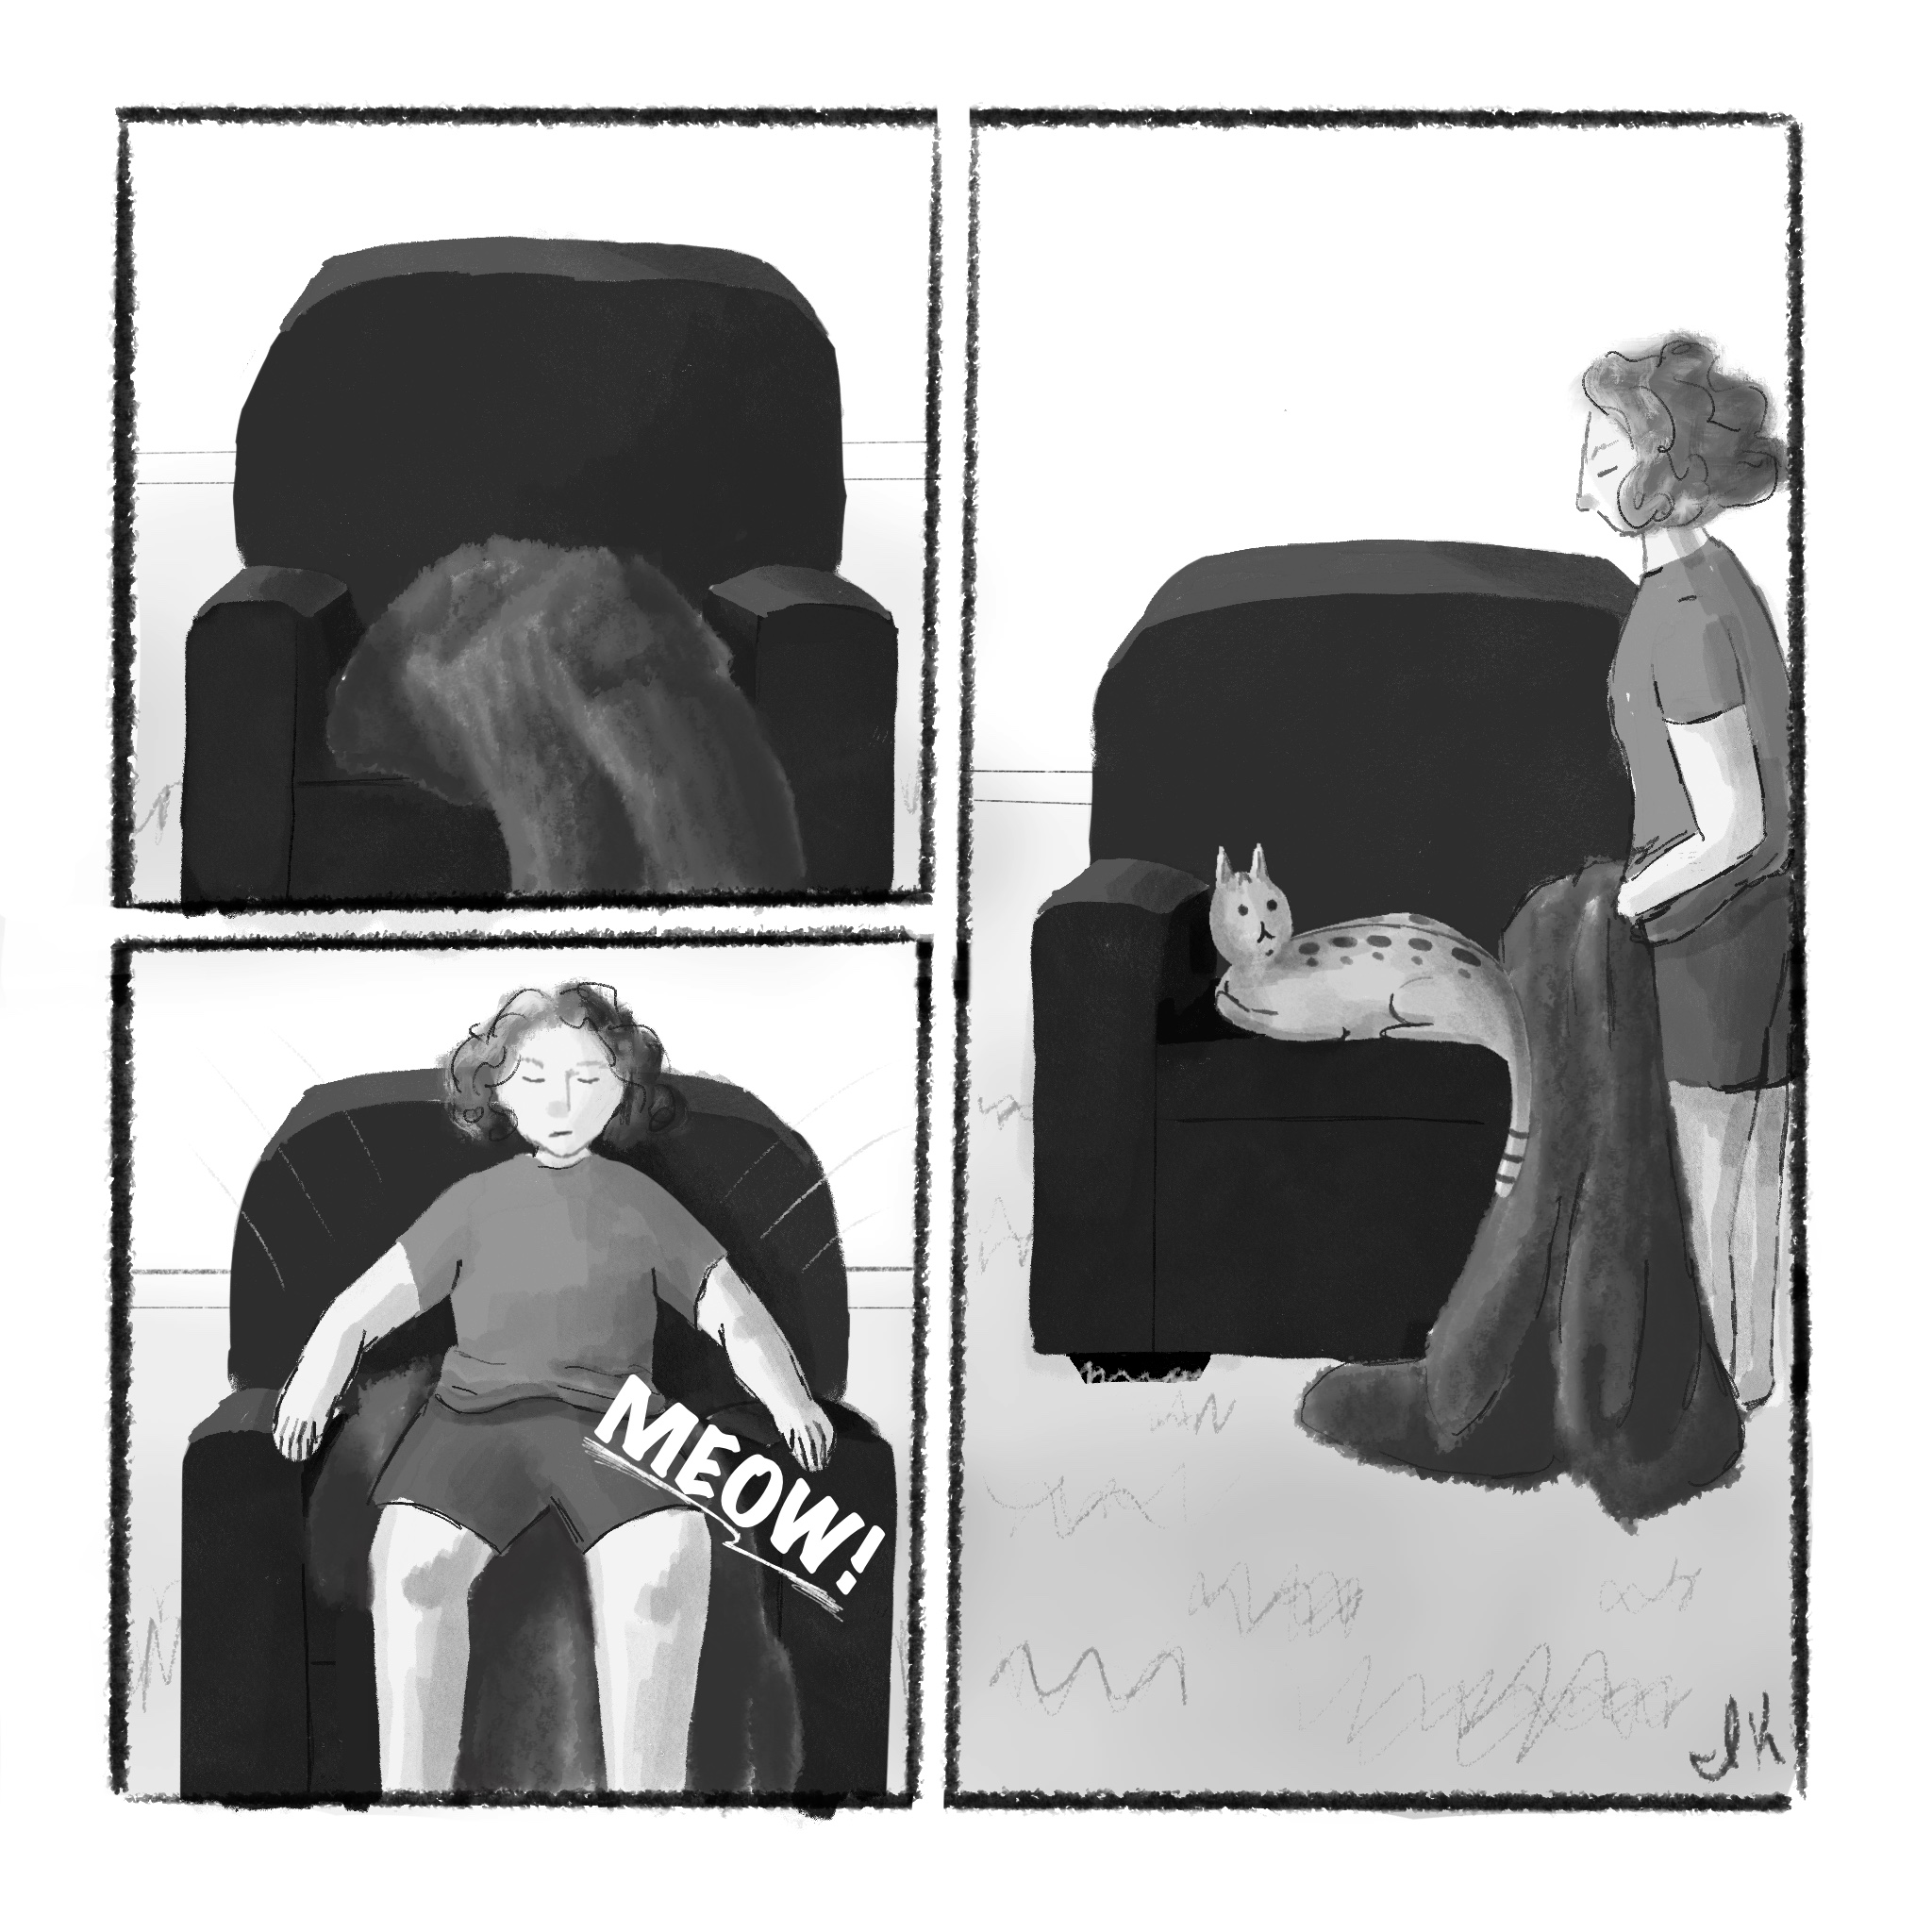 Comic about cat hiding under blanket on chair and person sitting on them